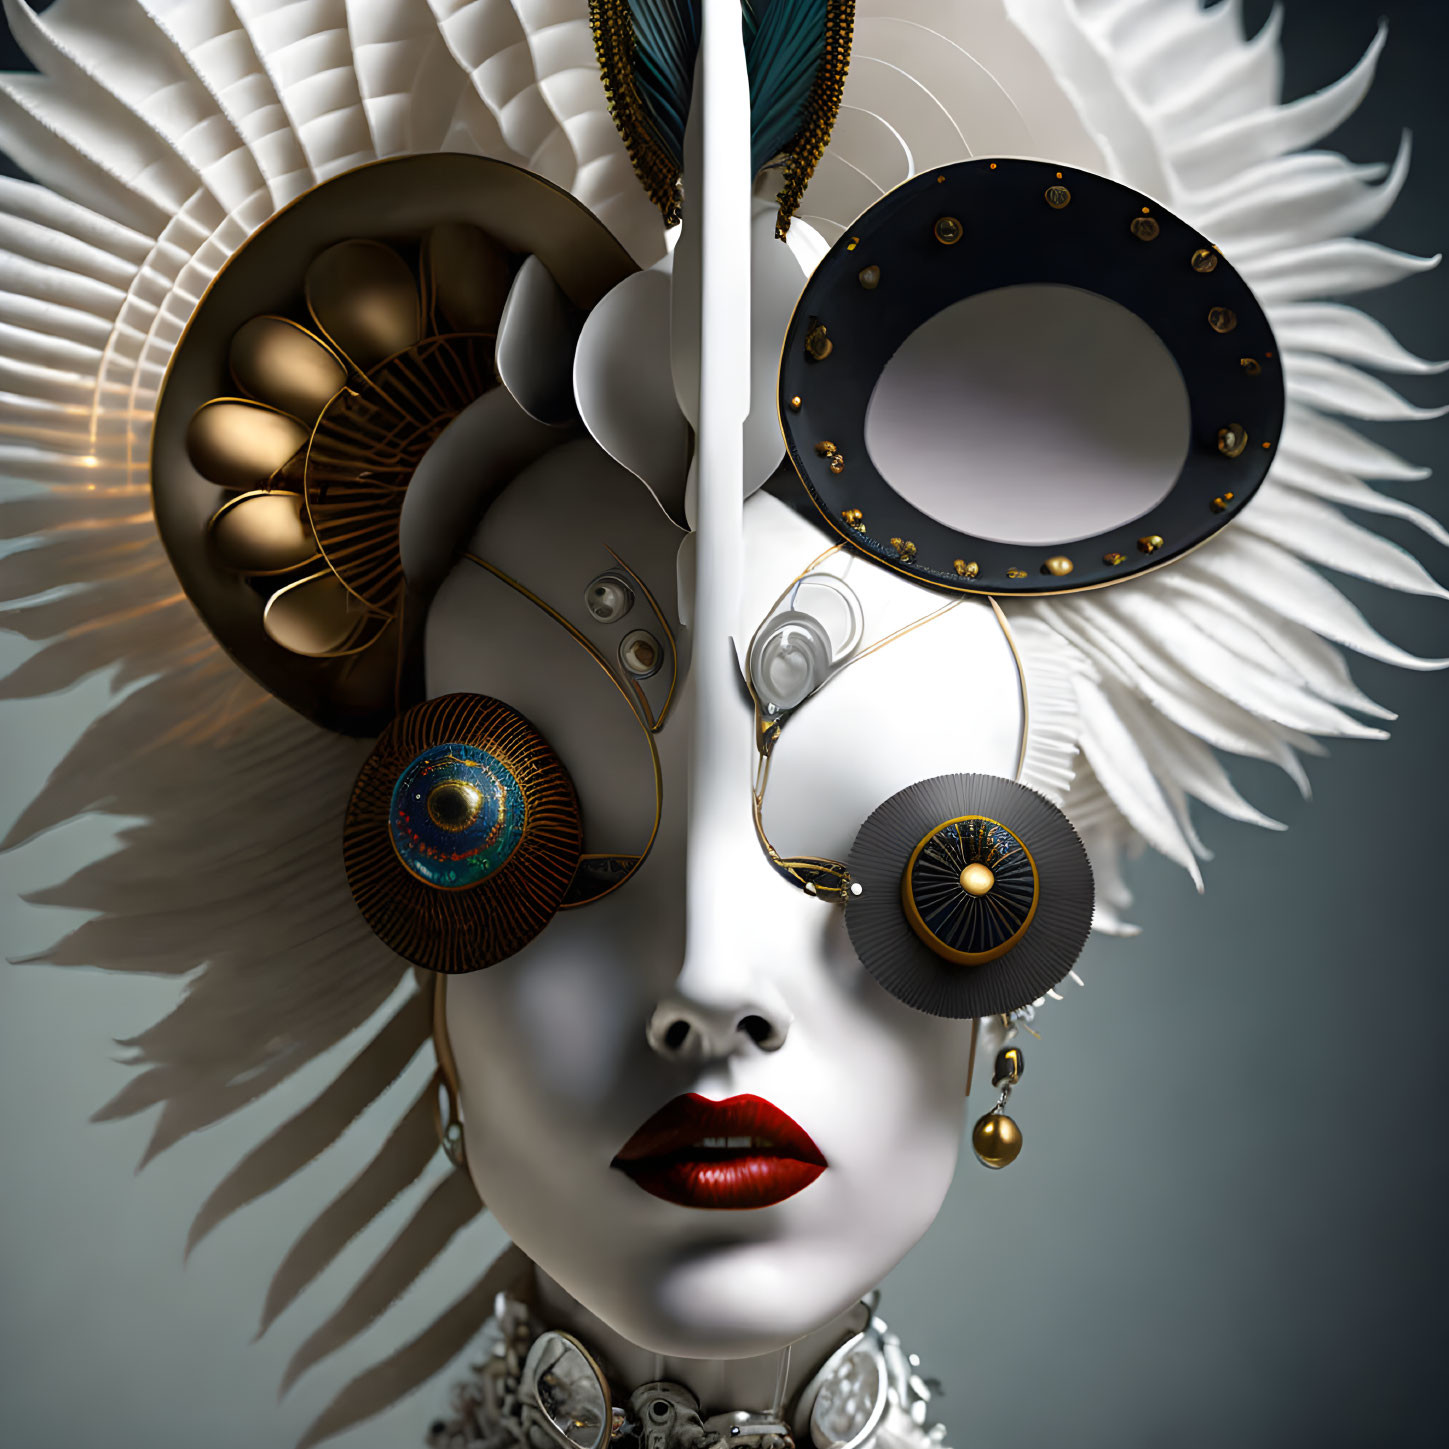 Face with mechanical and feathered details and red lip, peacock eye, and monocle-like attachment